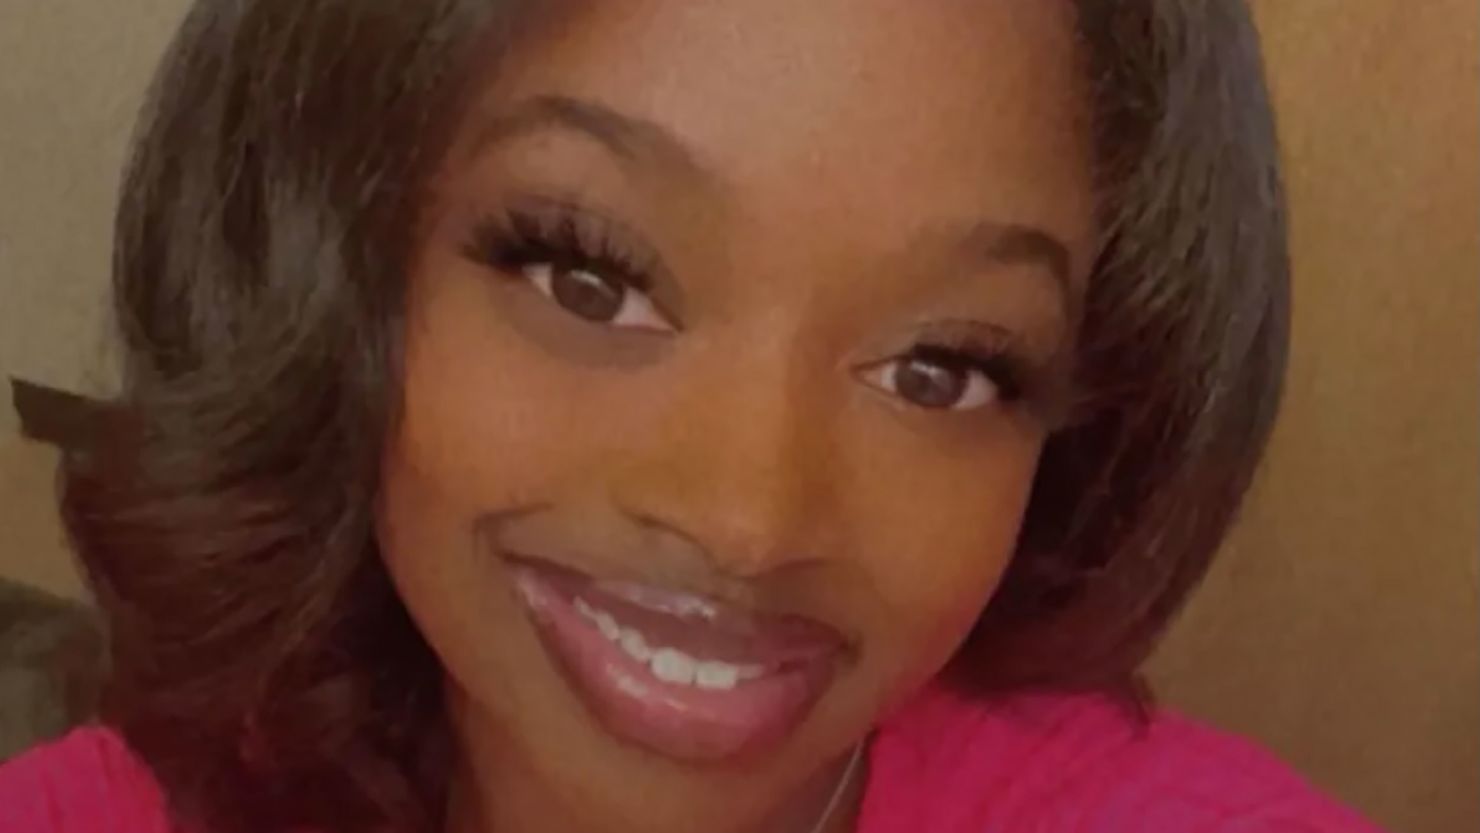 Sade Robinson, a 19-year-old studying for an associate's degree at Milwaukee Area Technical College, hoped to pursue a career in criminal justice after she graduated.